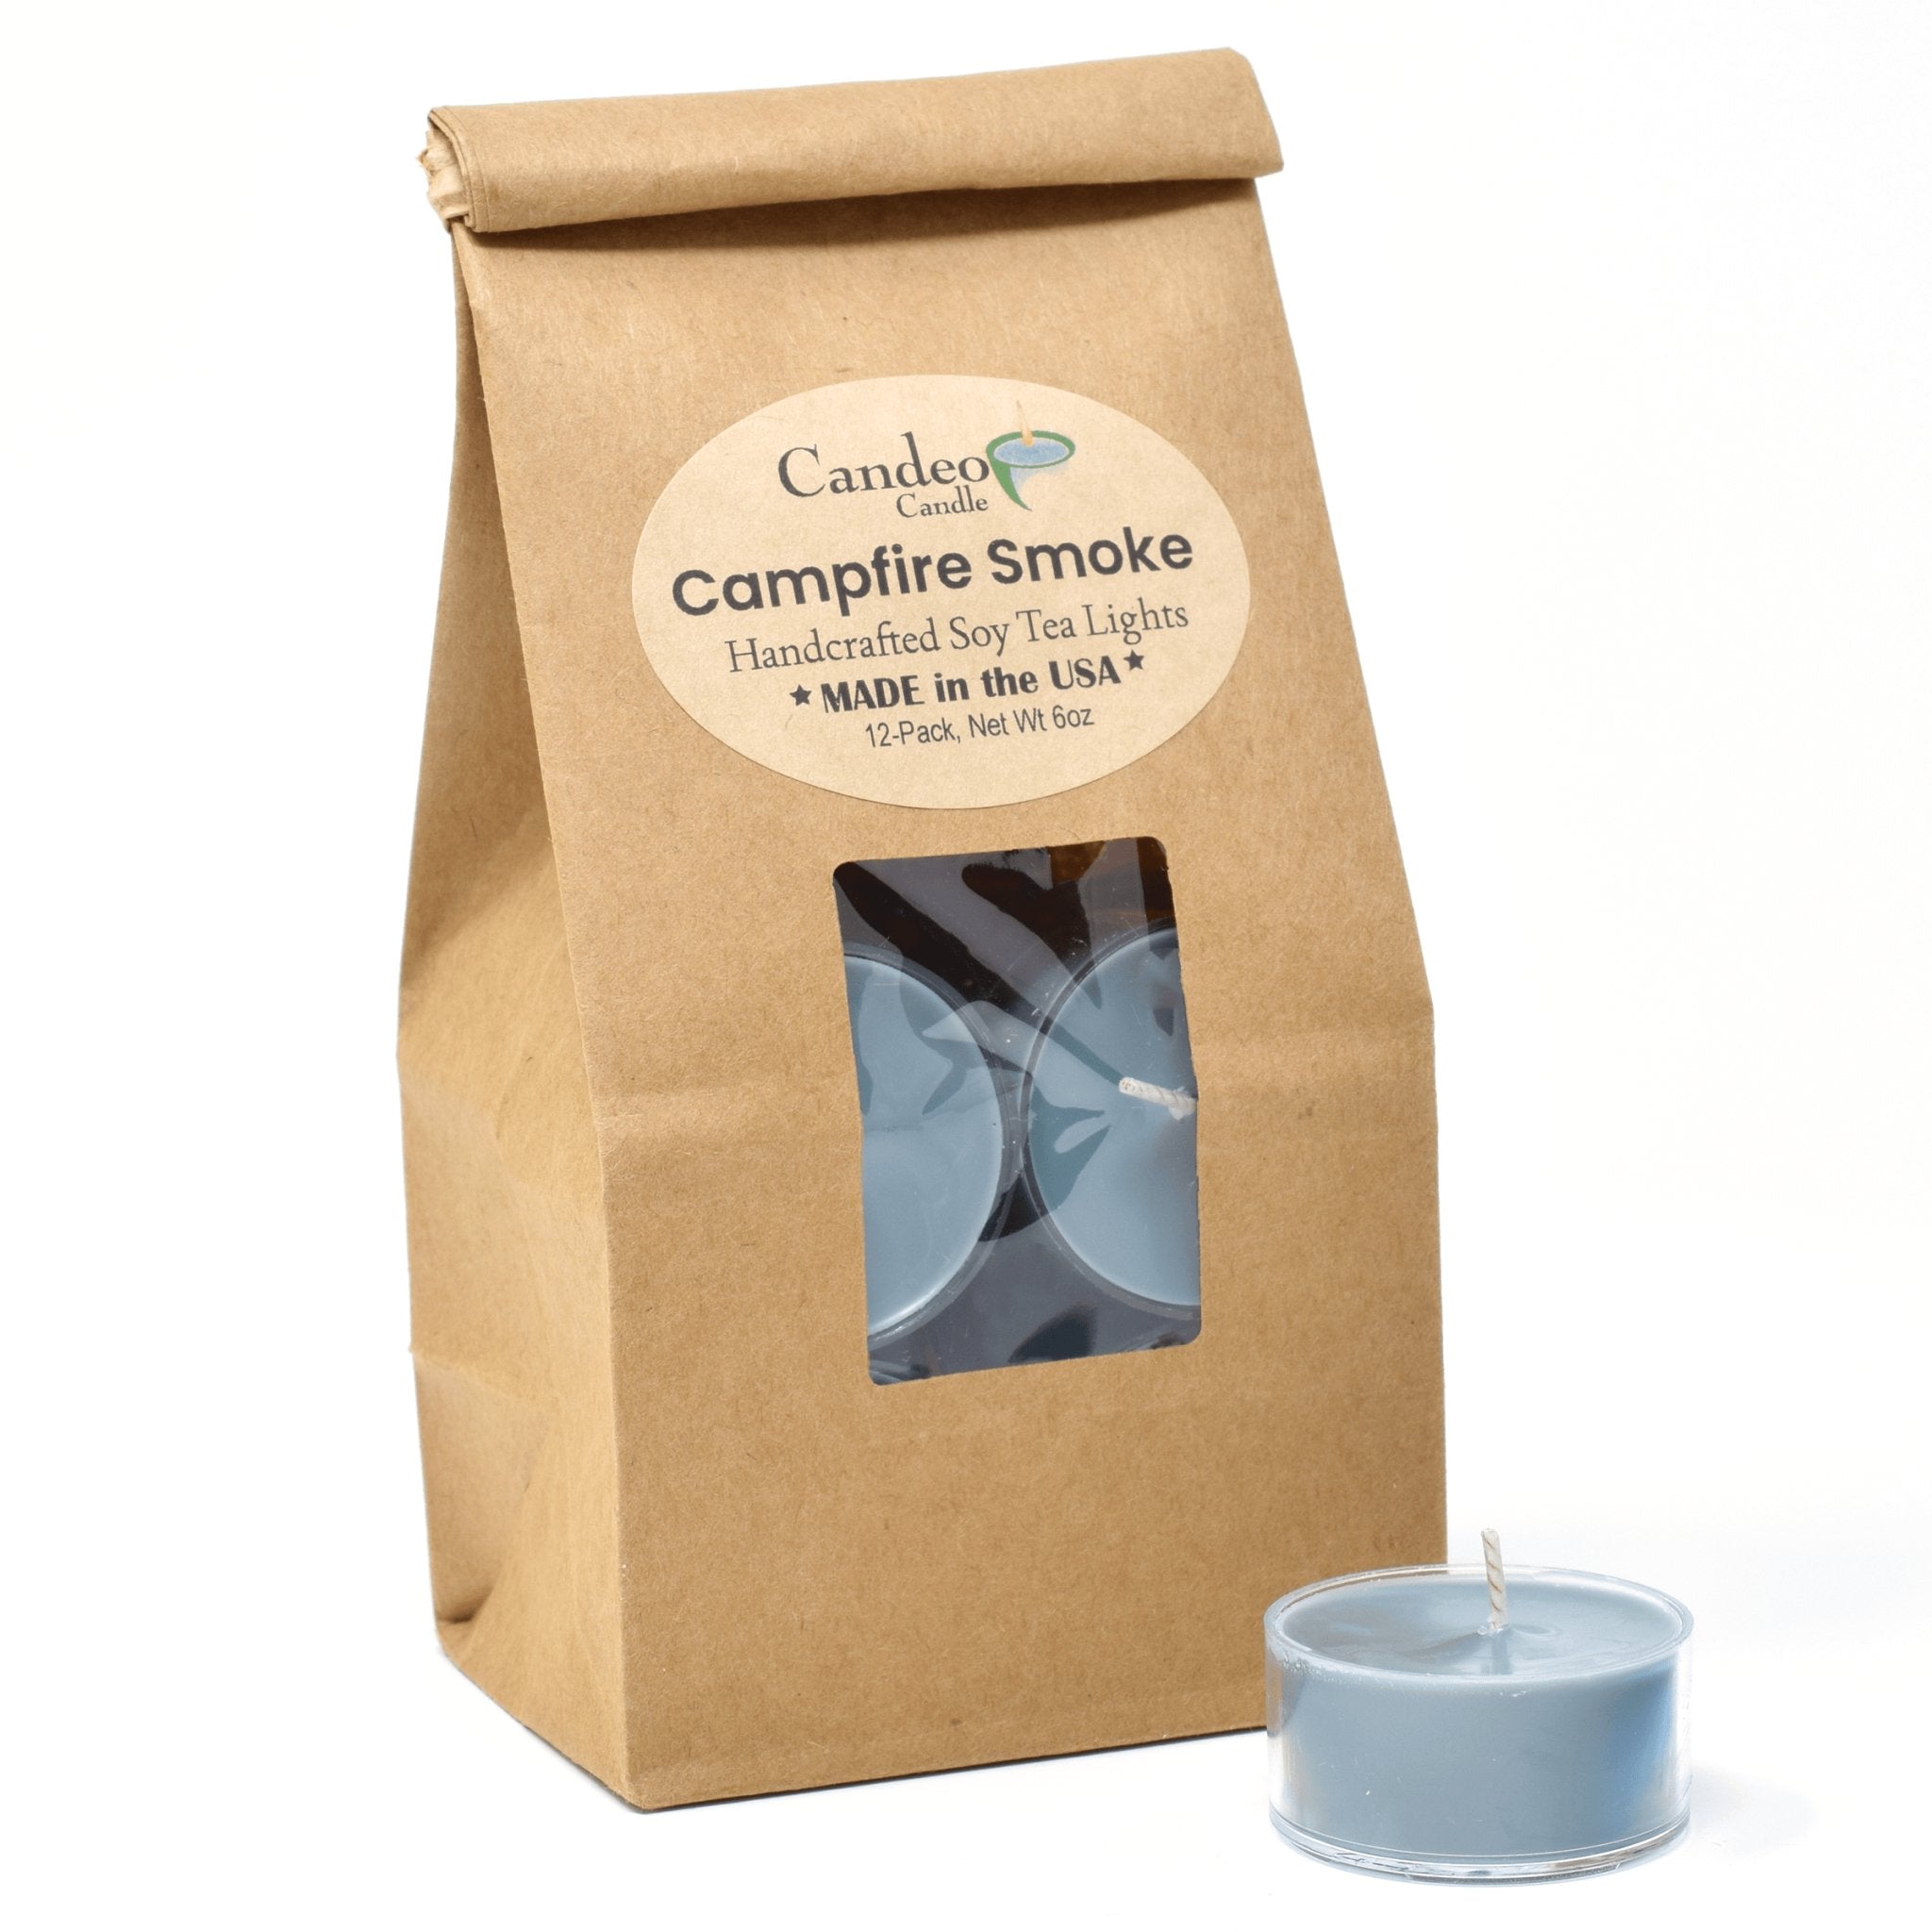 Campfire Smoke, Soy Tea Light 12-Pack - Candeo Candle